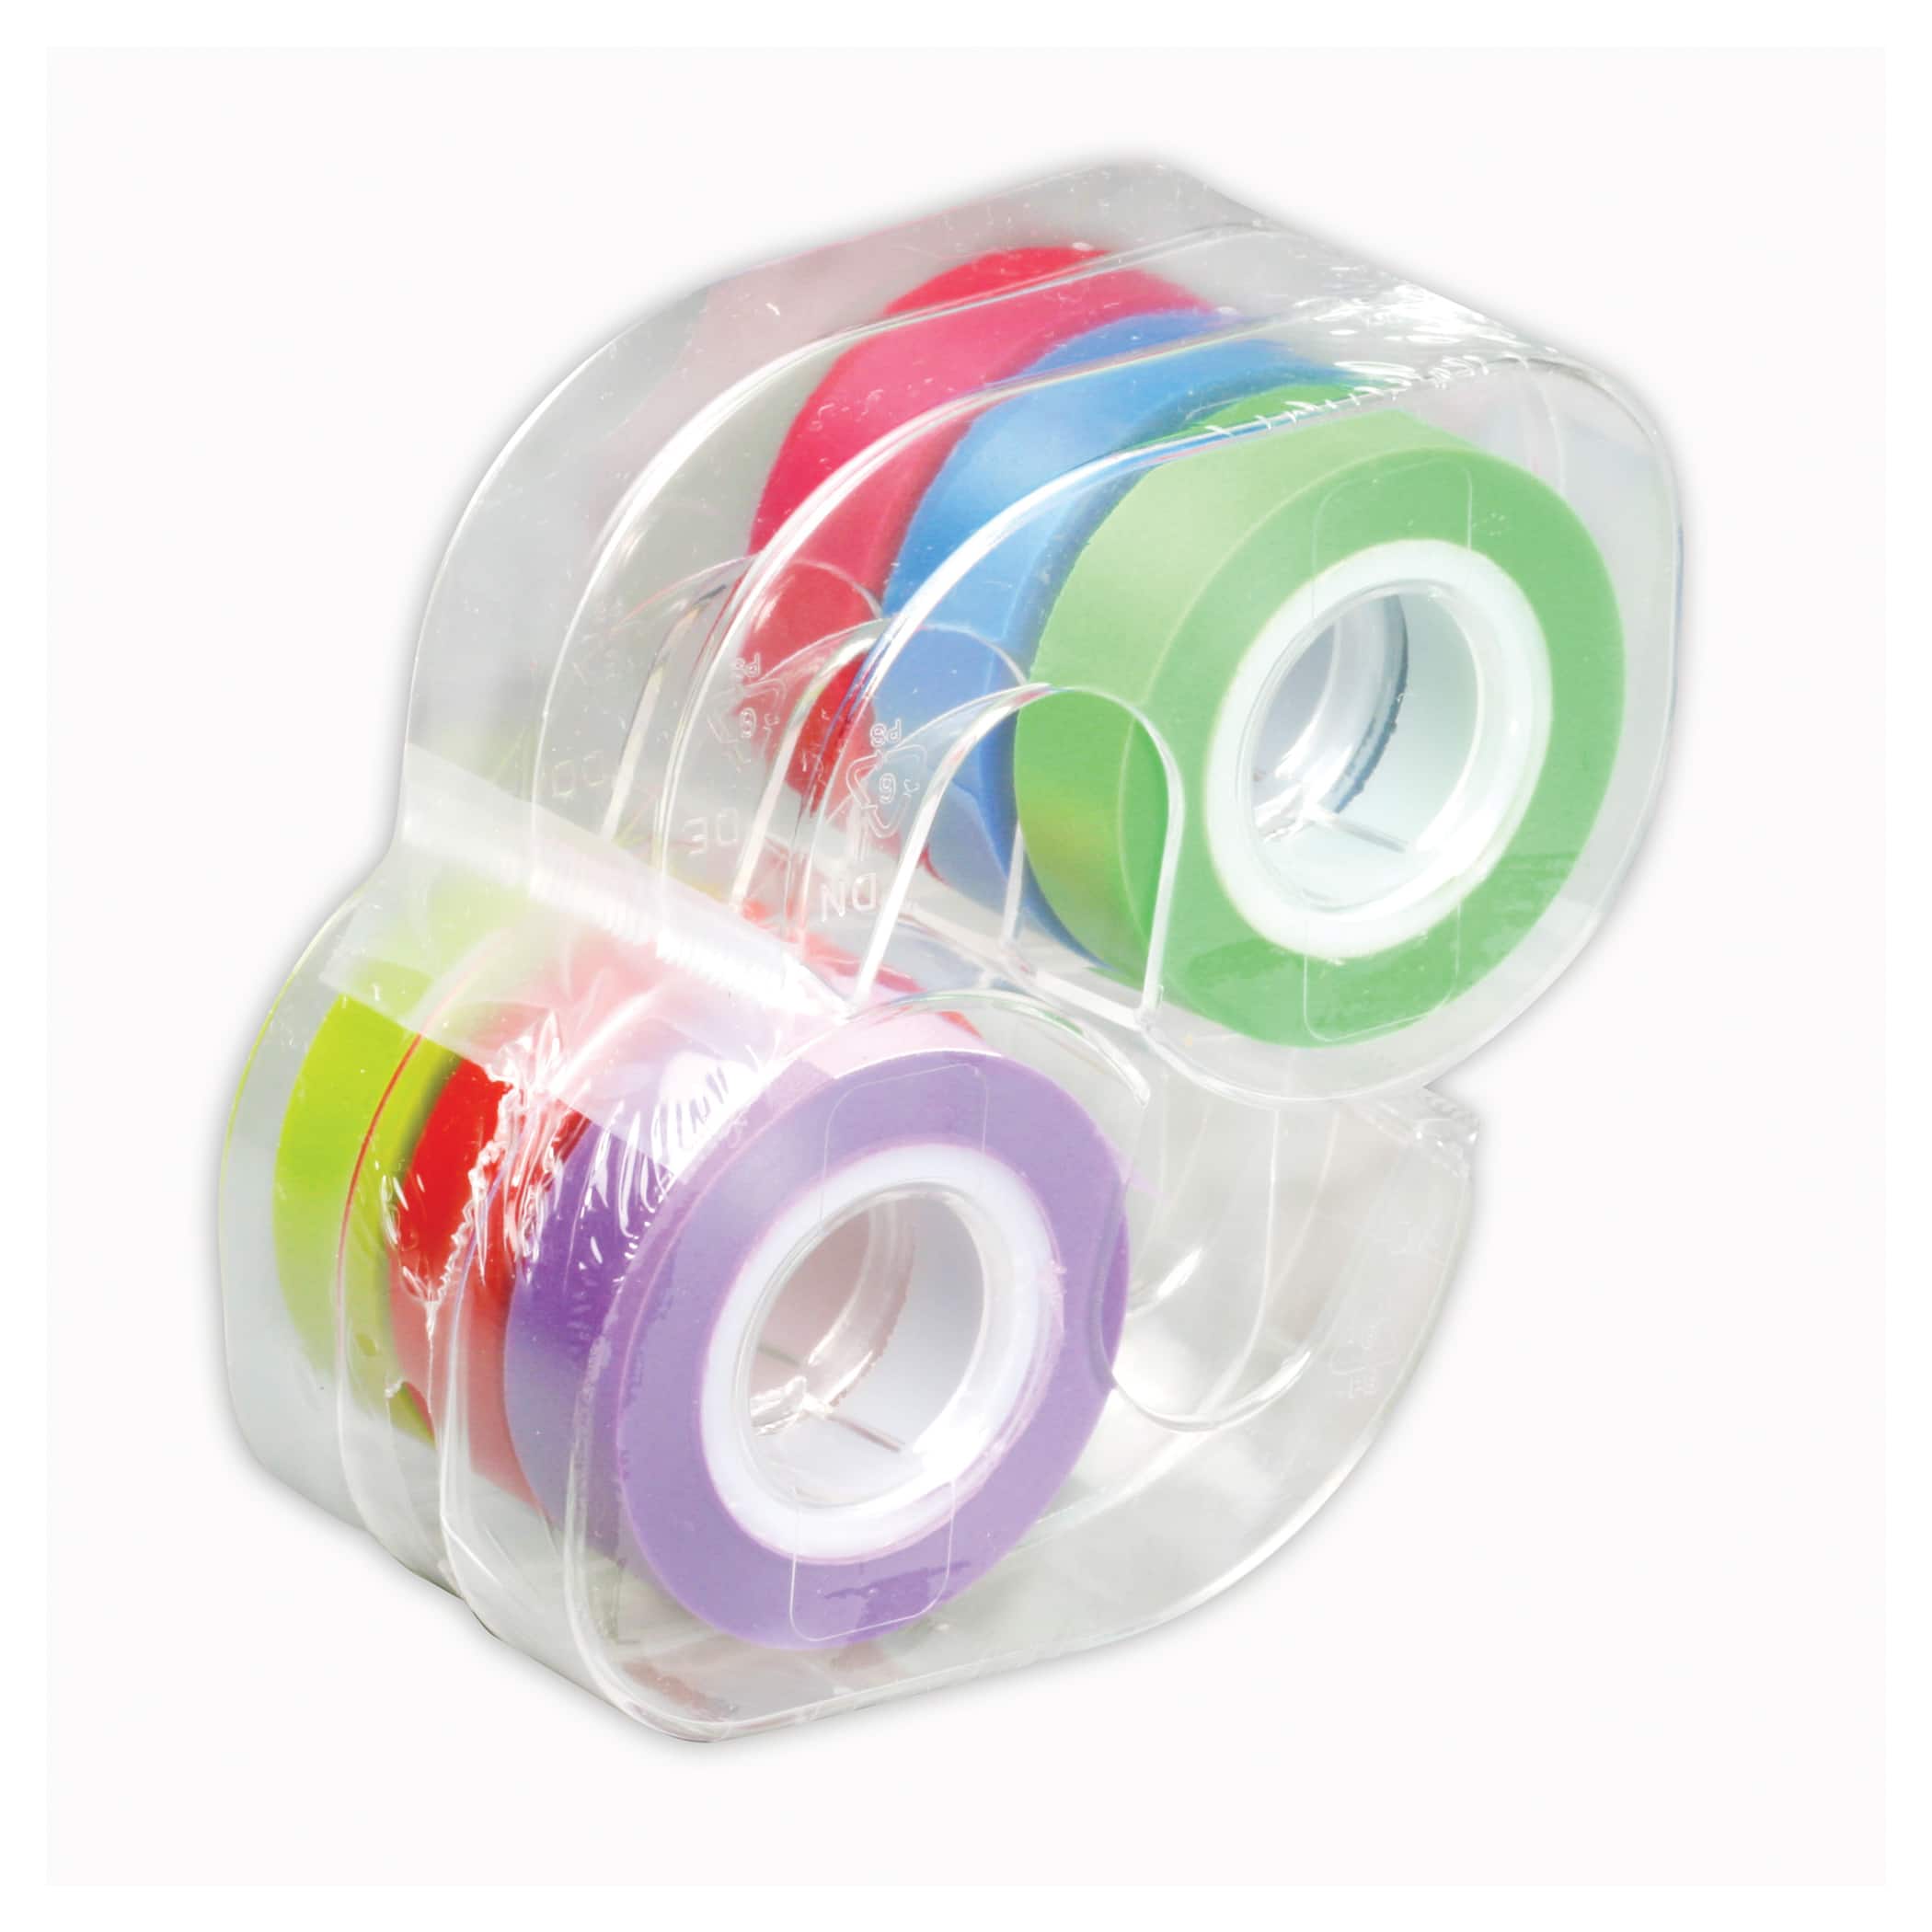 12 Packs: 6 ct. (72 total) Multicolor Removable Highlighter Tape